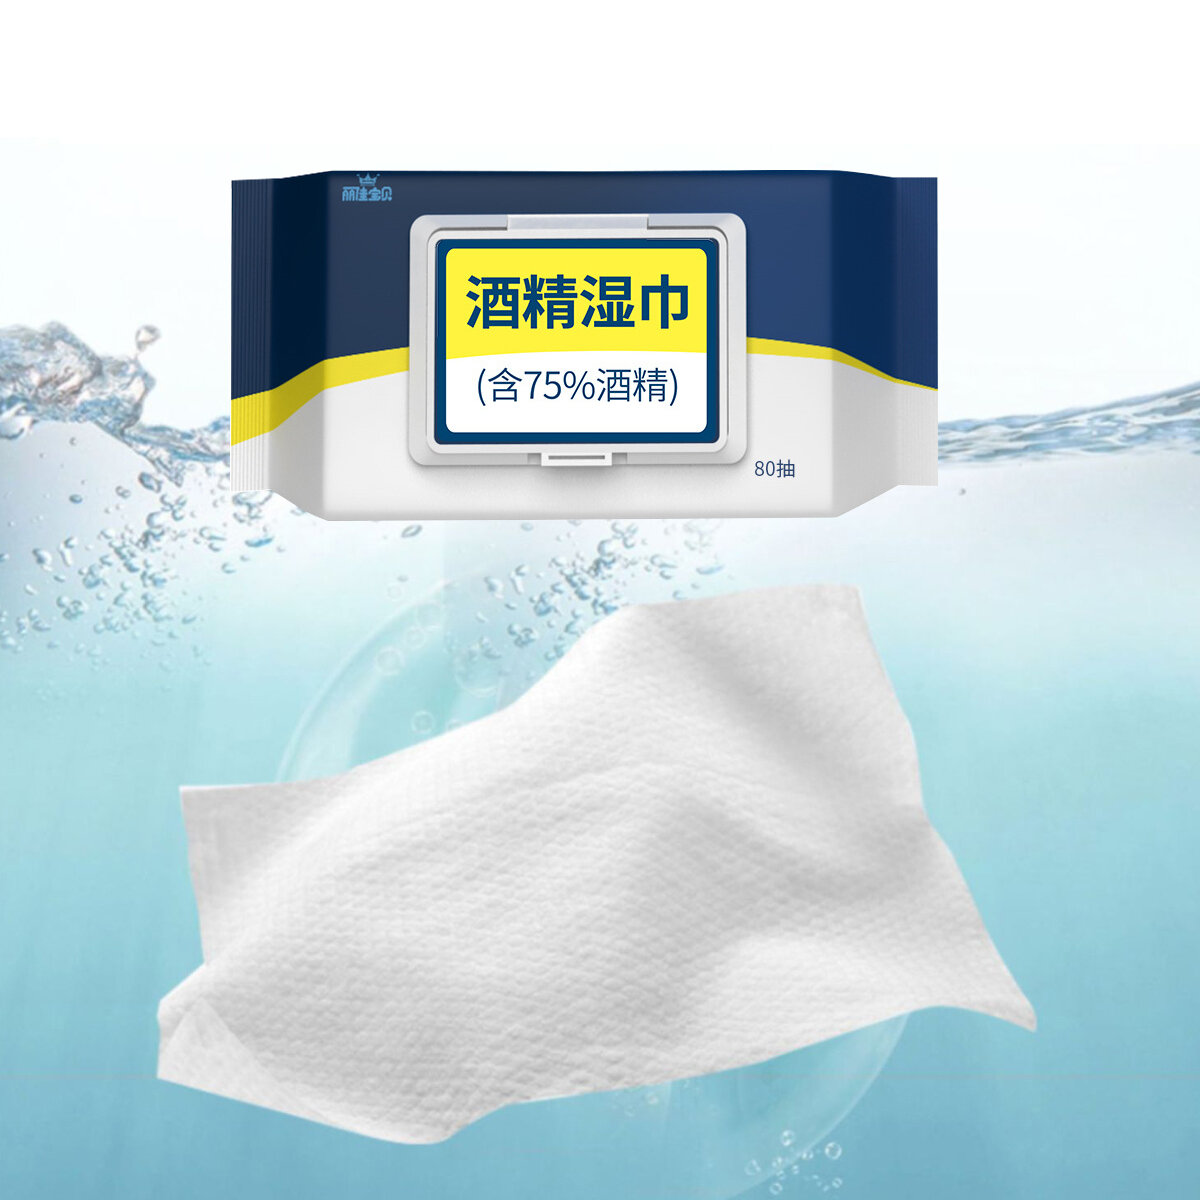 

1 Pack of 80Pcs 190mmx140mm 75% Alcohol Disinfecting Wipes Disinfection Cleaning Wet Wipes Used for Skin Watch Cleaning